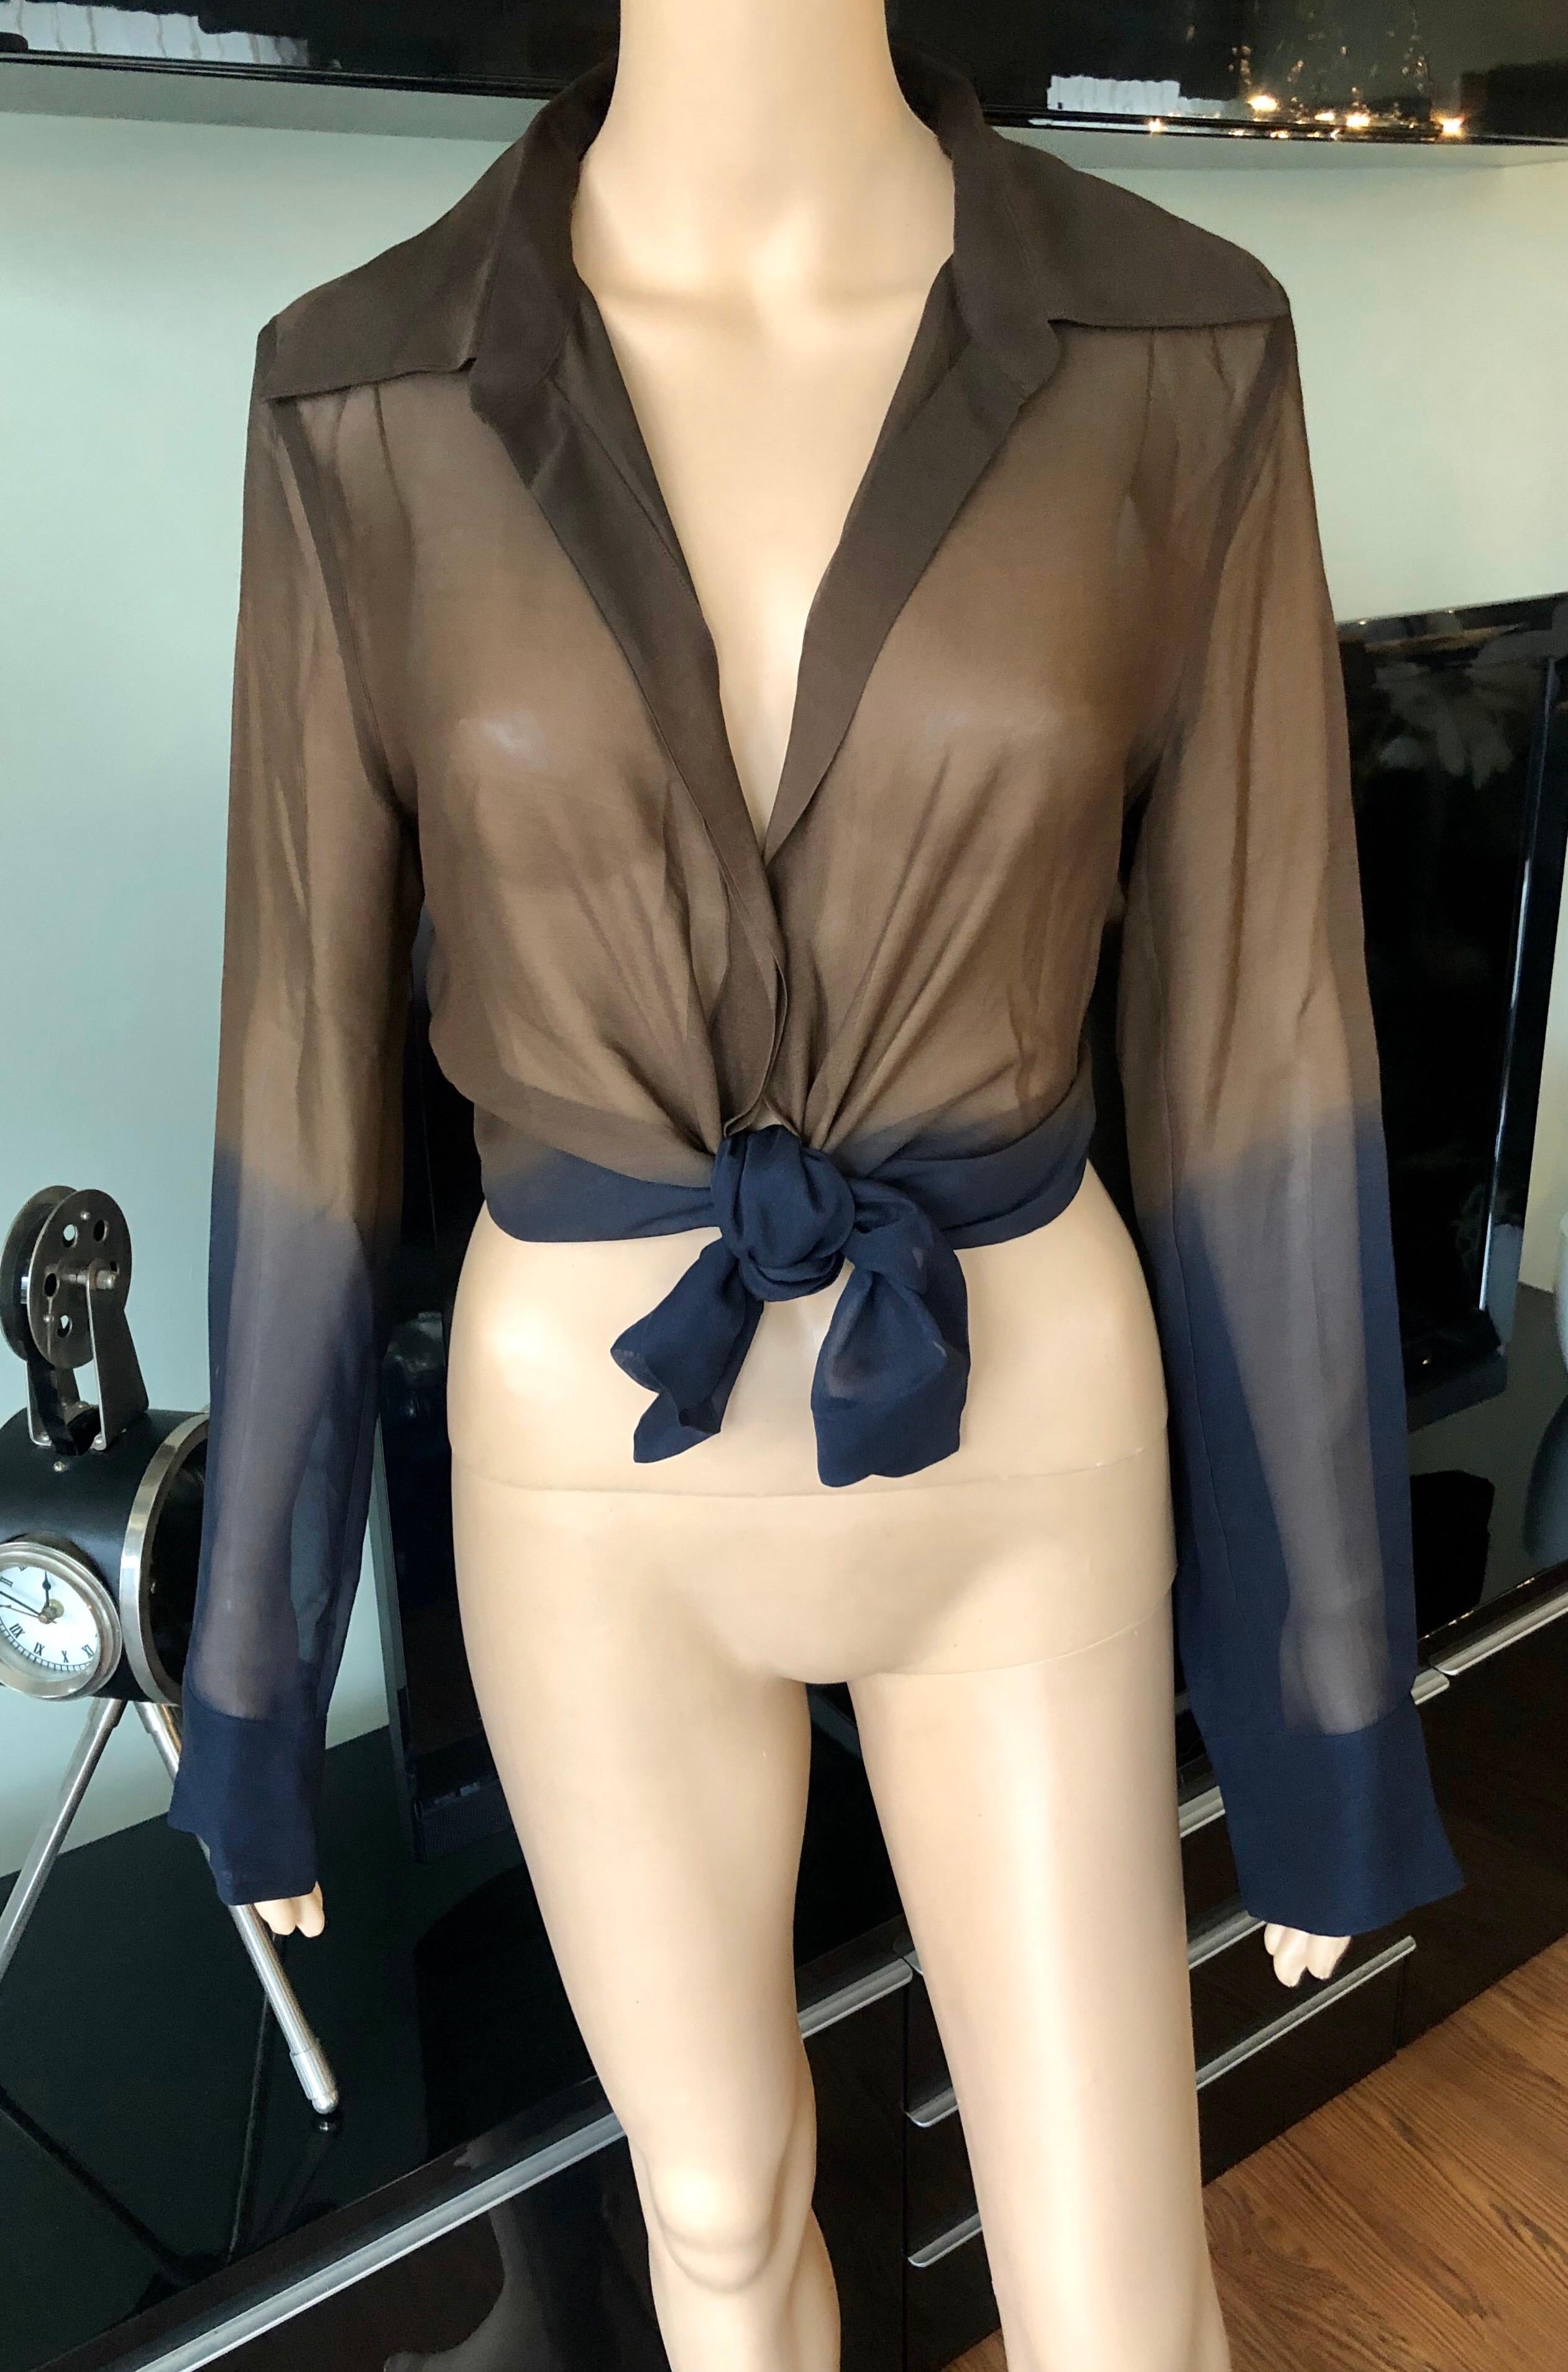 Gucci by Tom Ford 1997 Vintage Sheer Brown & Blue Ombre Silk Tunic Top IT 44

Please note the approximate measurements below:
Chest: 41